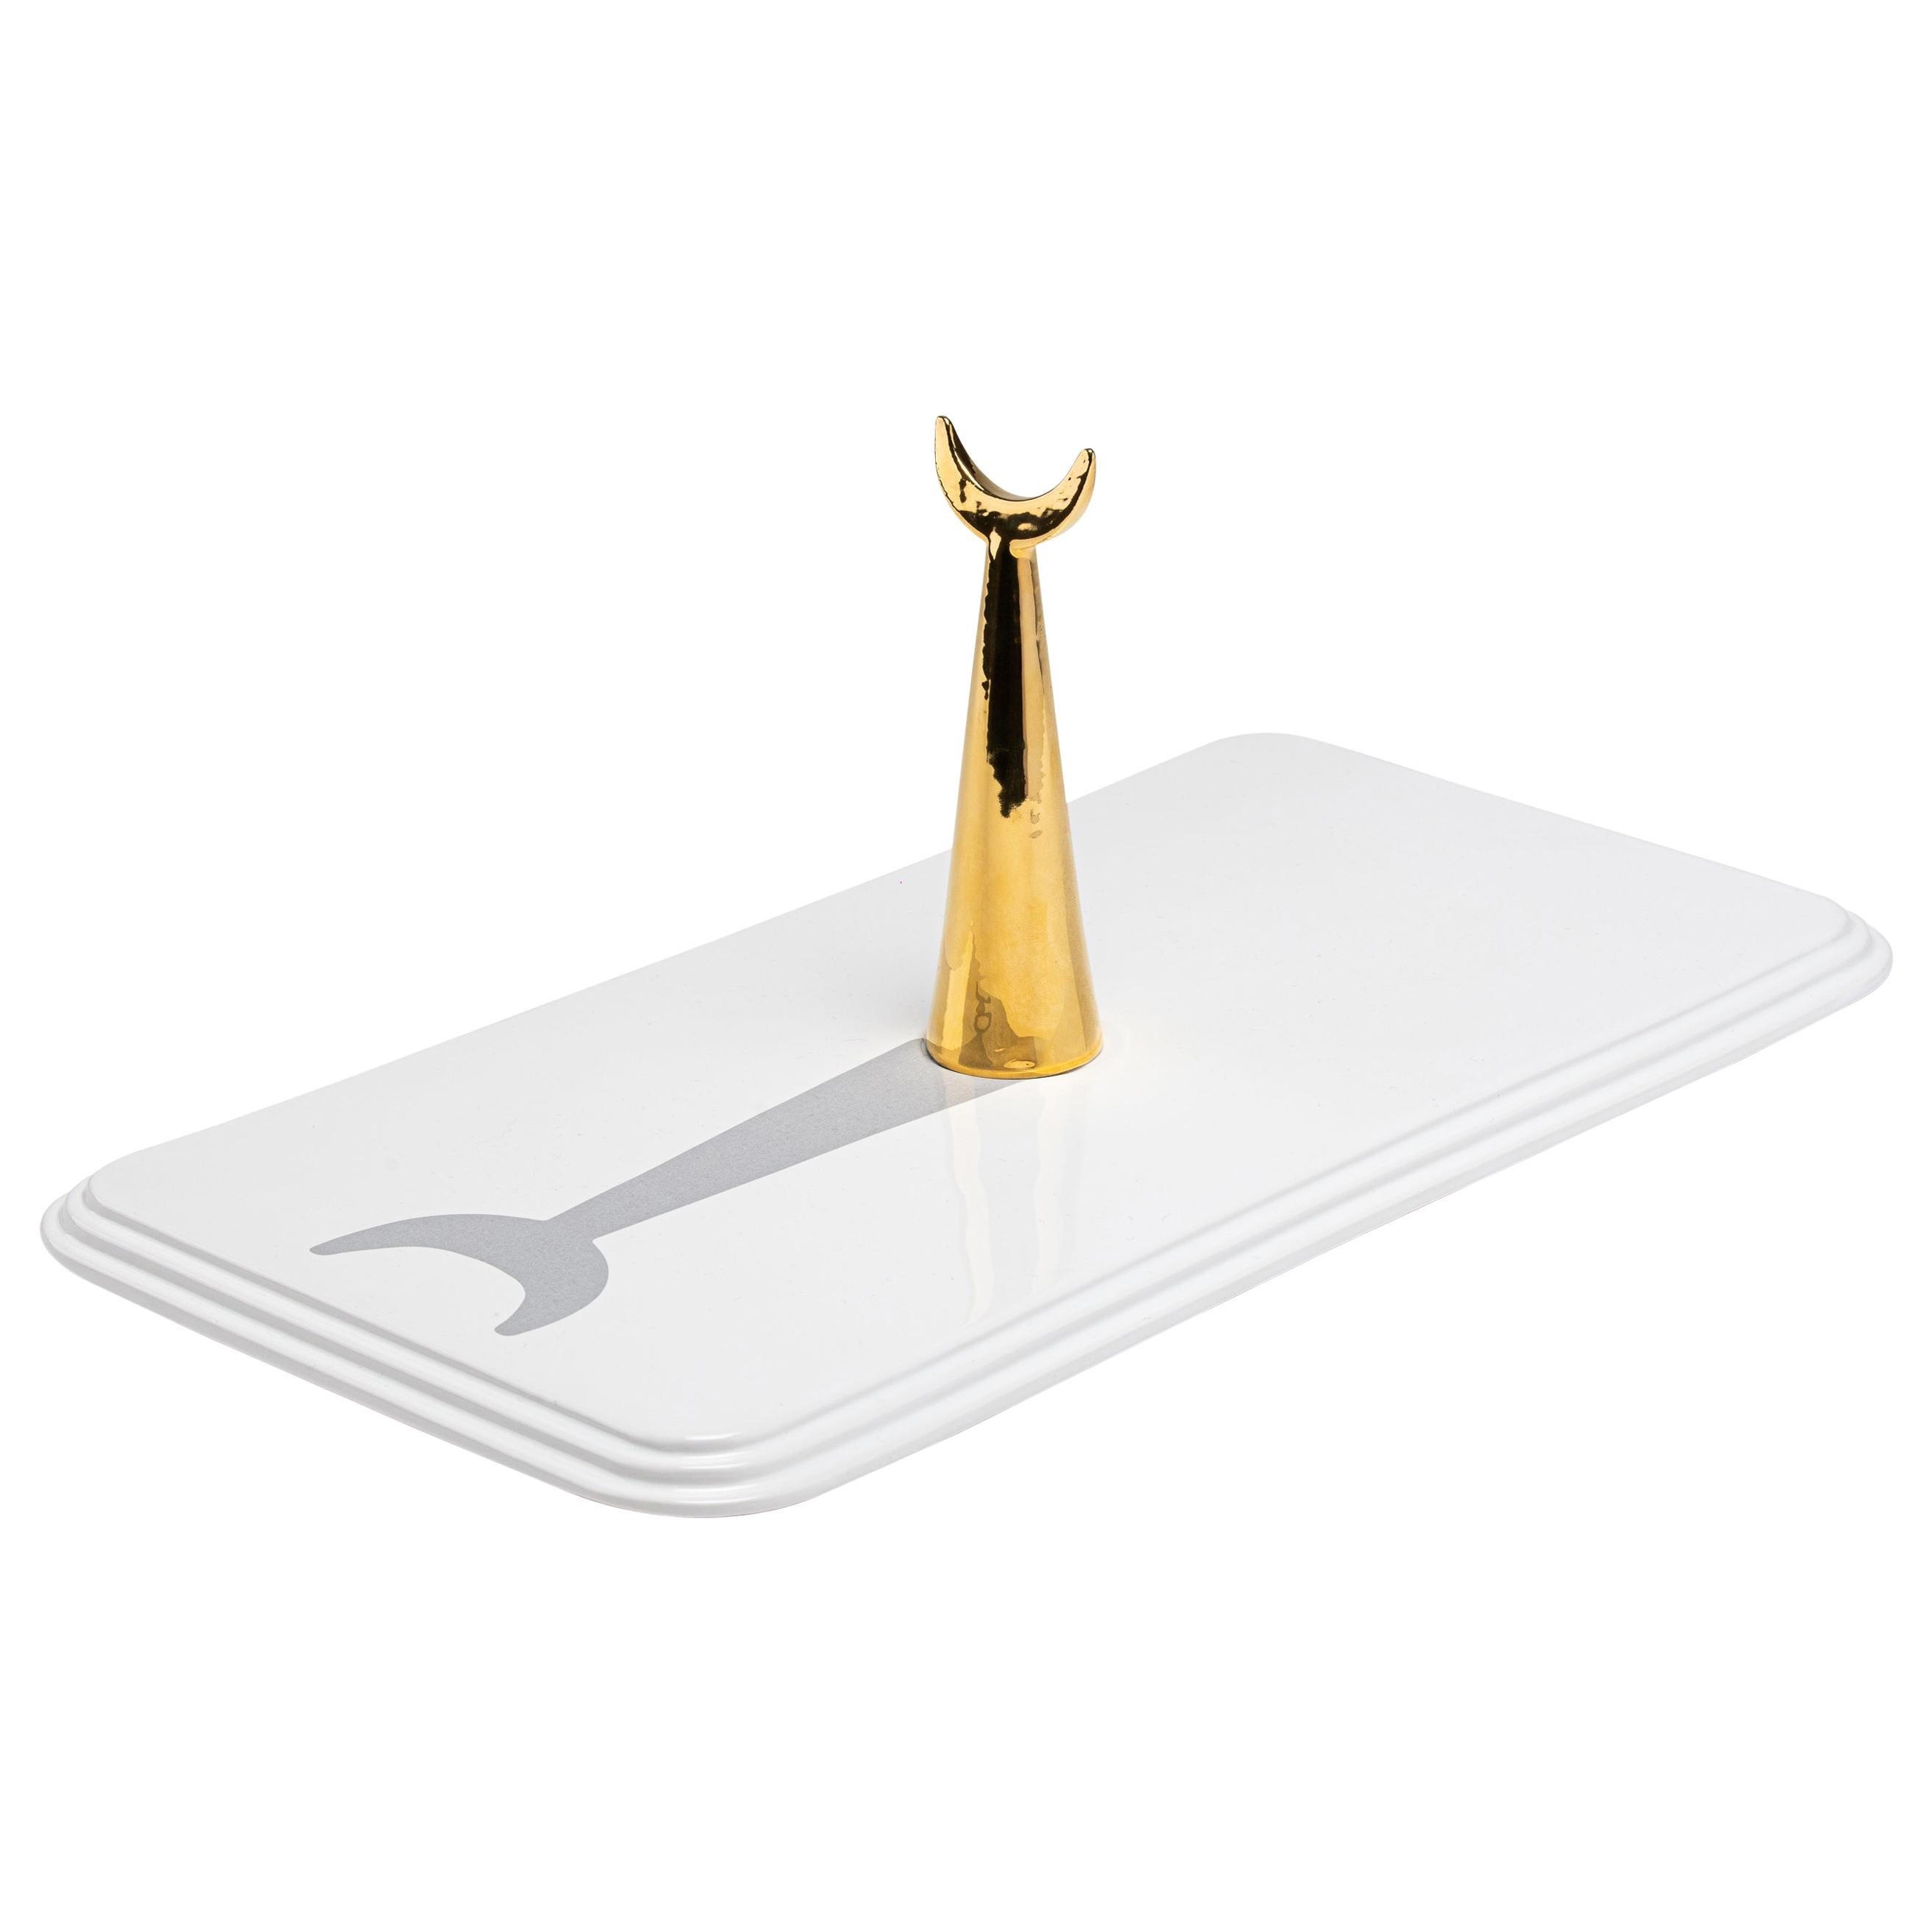 19:00 _ White Ceramic and 24-K Gold Details Handcrafted Rectangular Tray